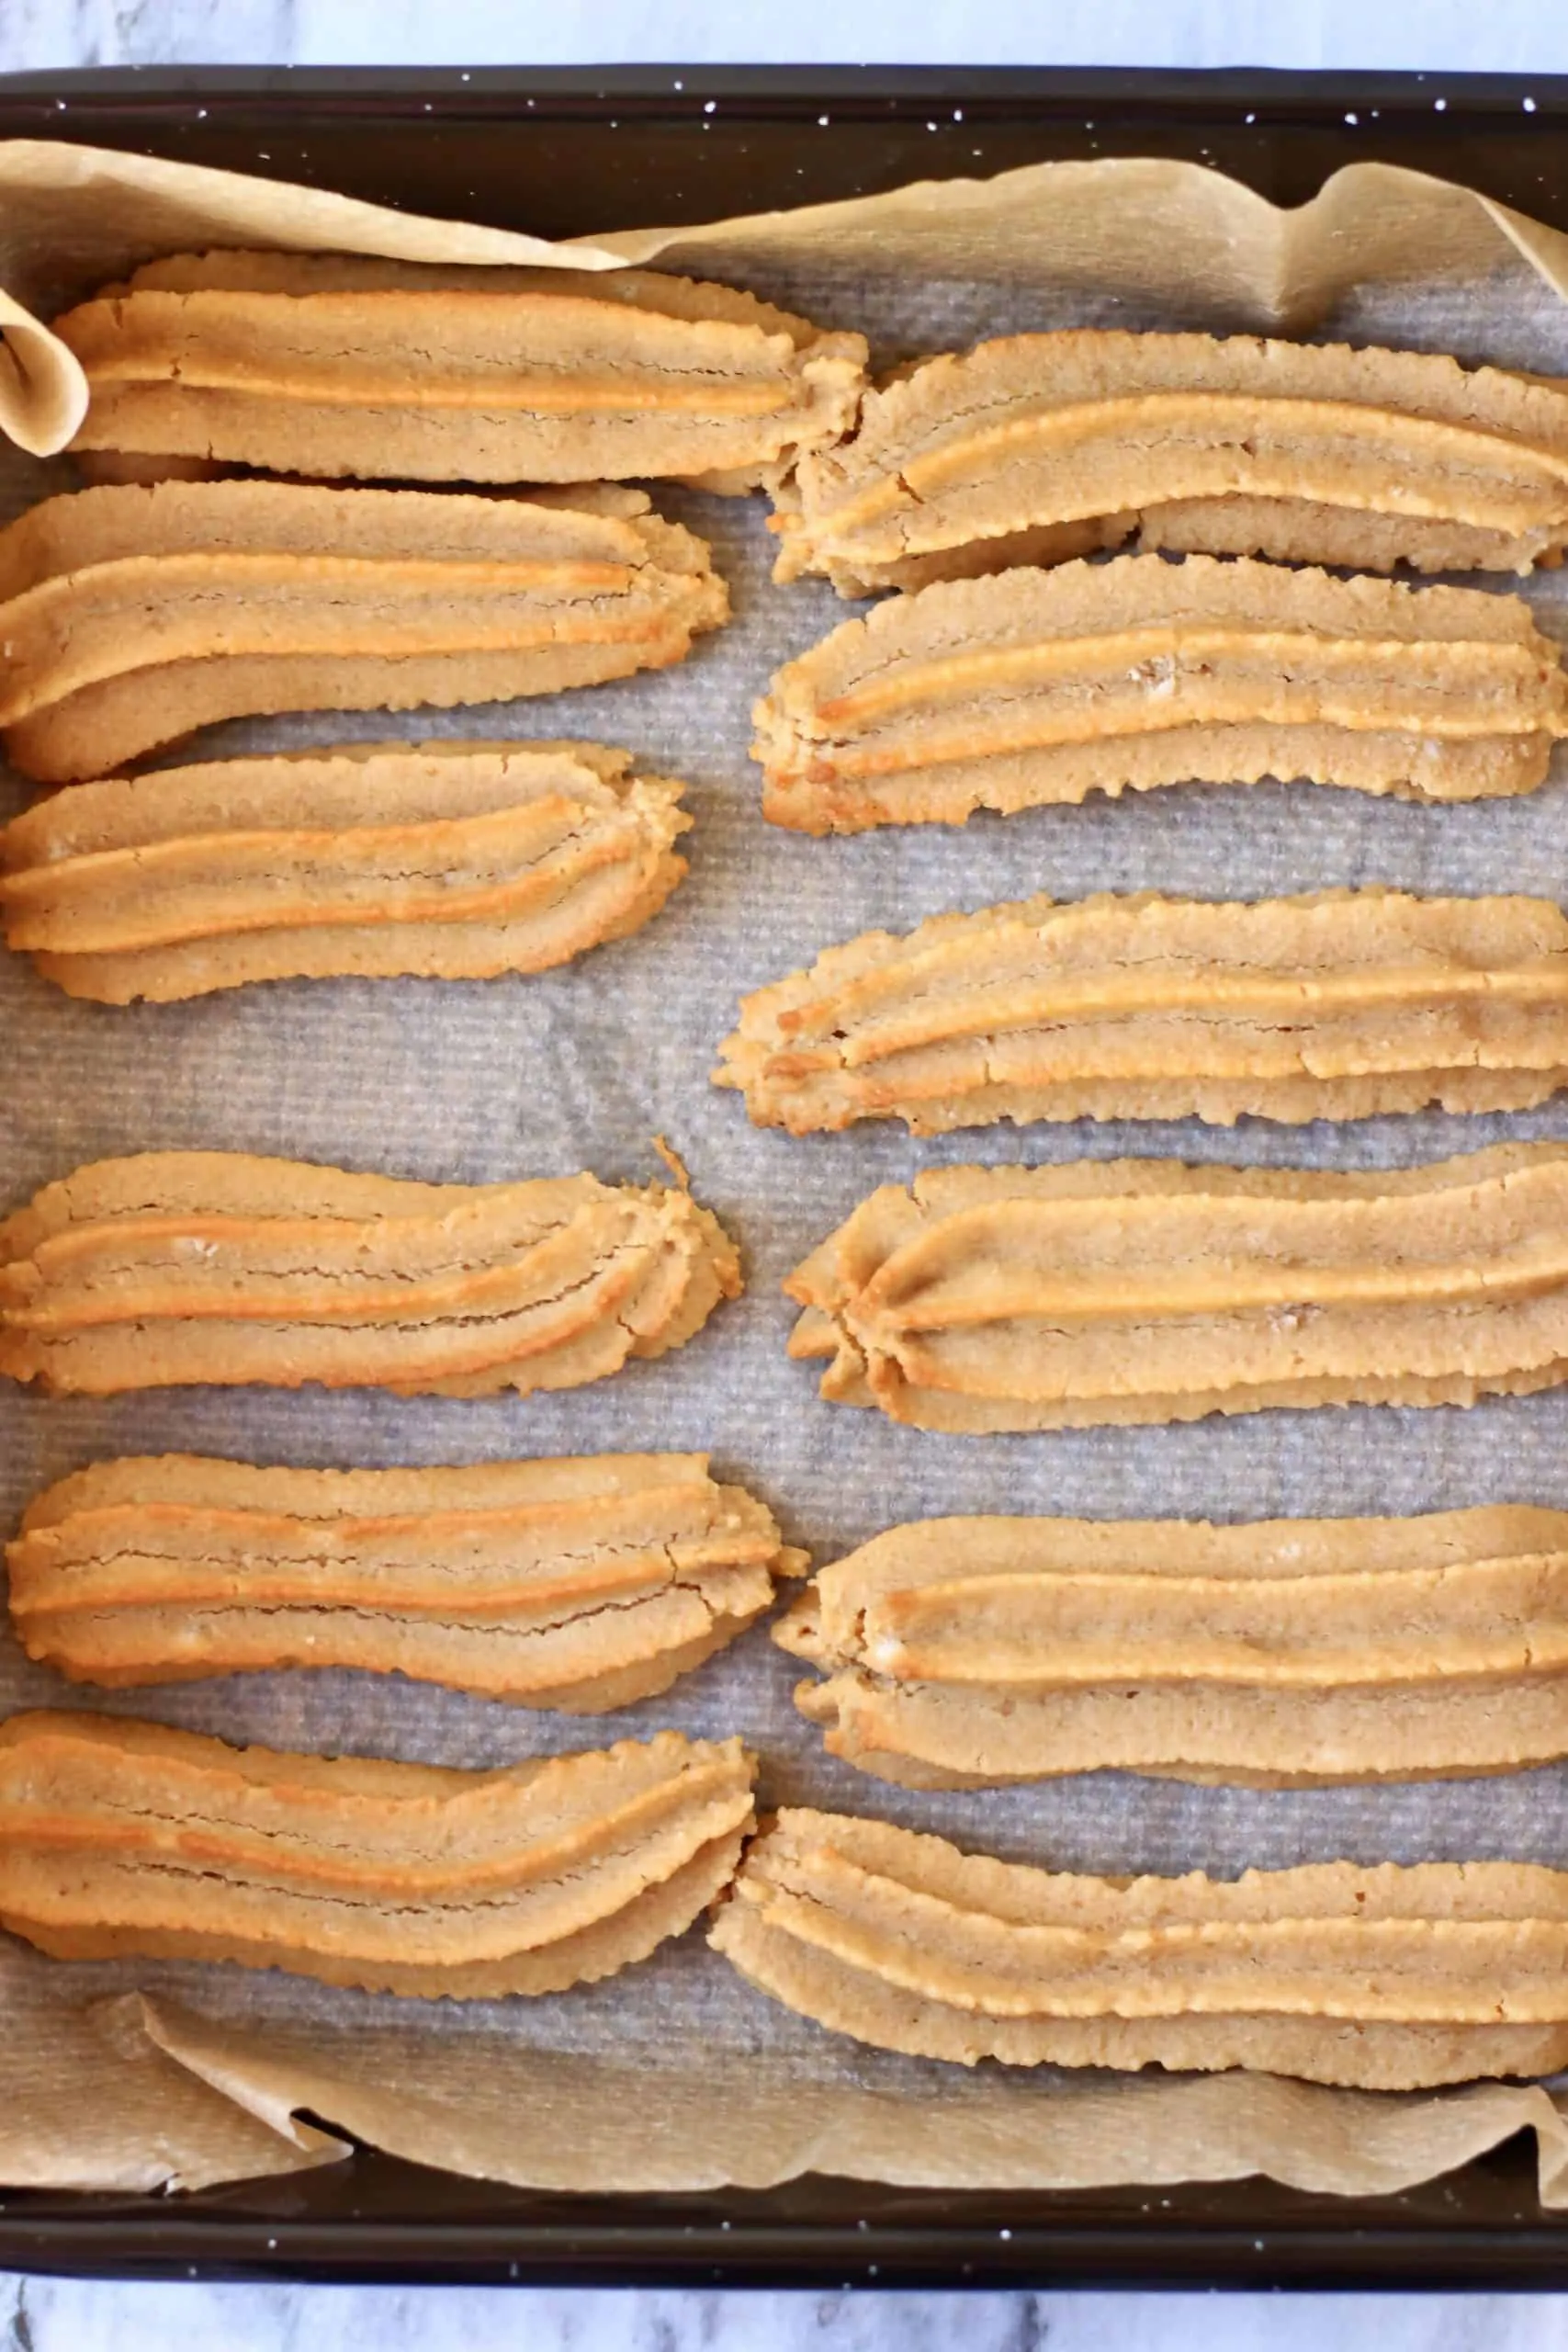 Twelve baked gluten-free vegan churros on a baking tray lined with baking paper